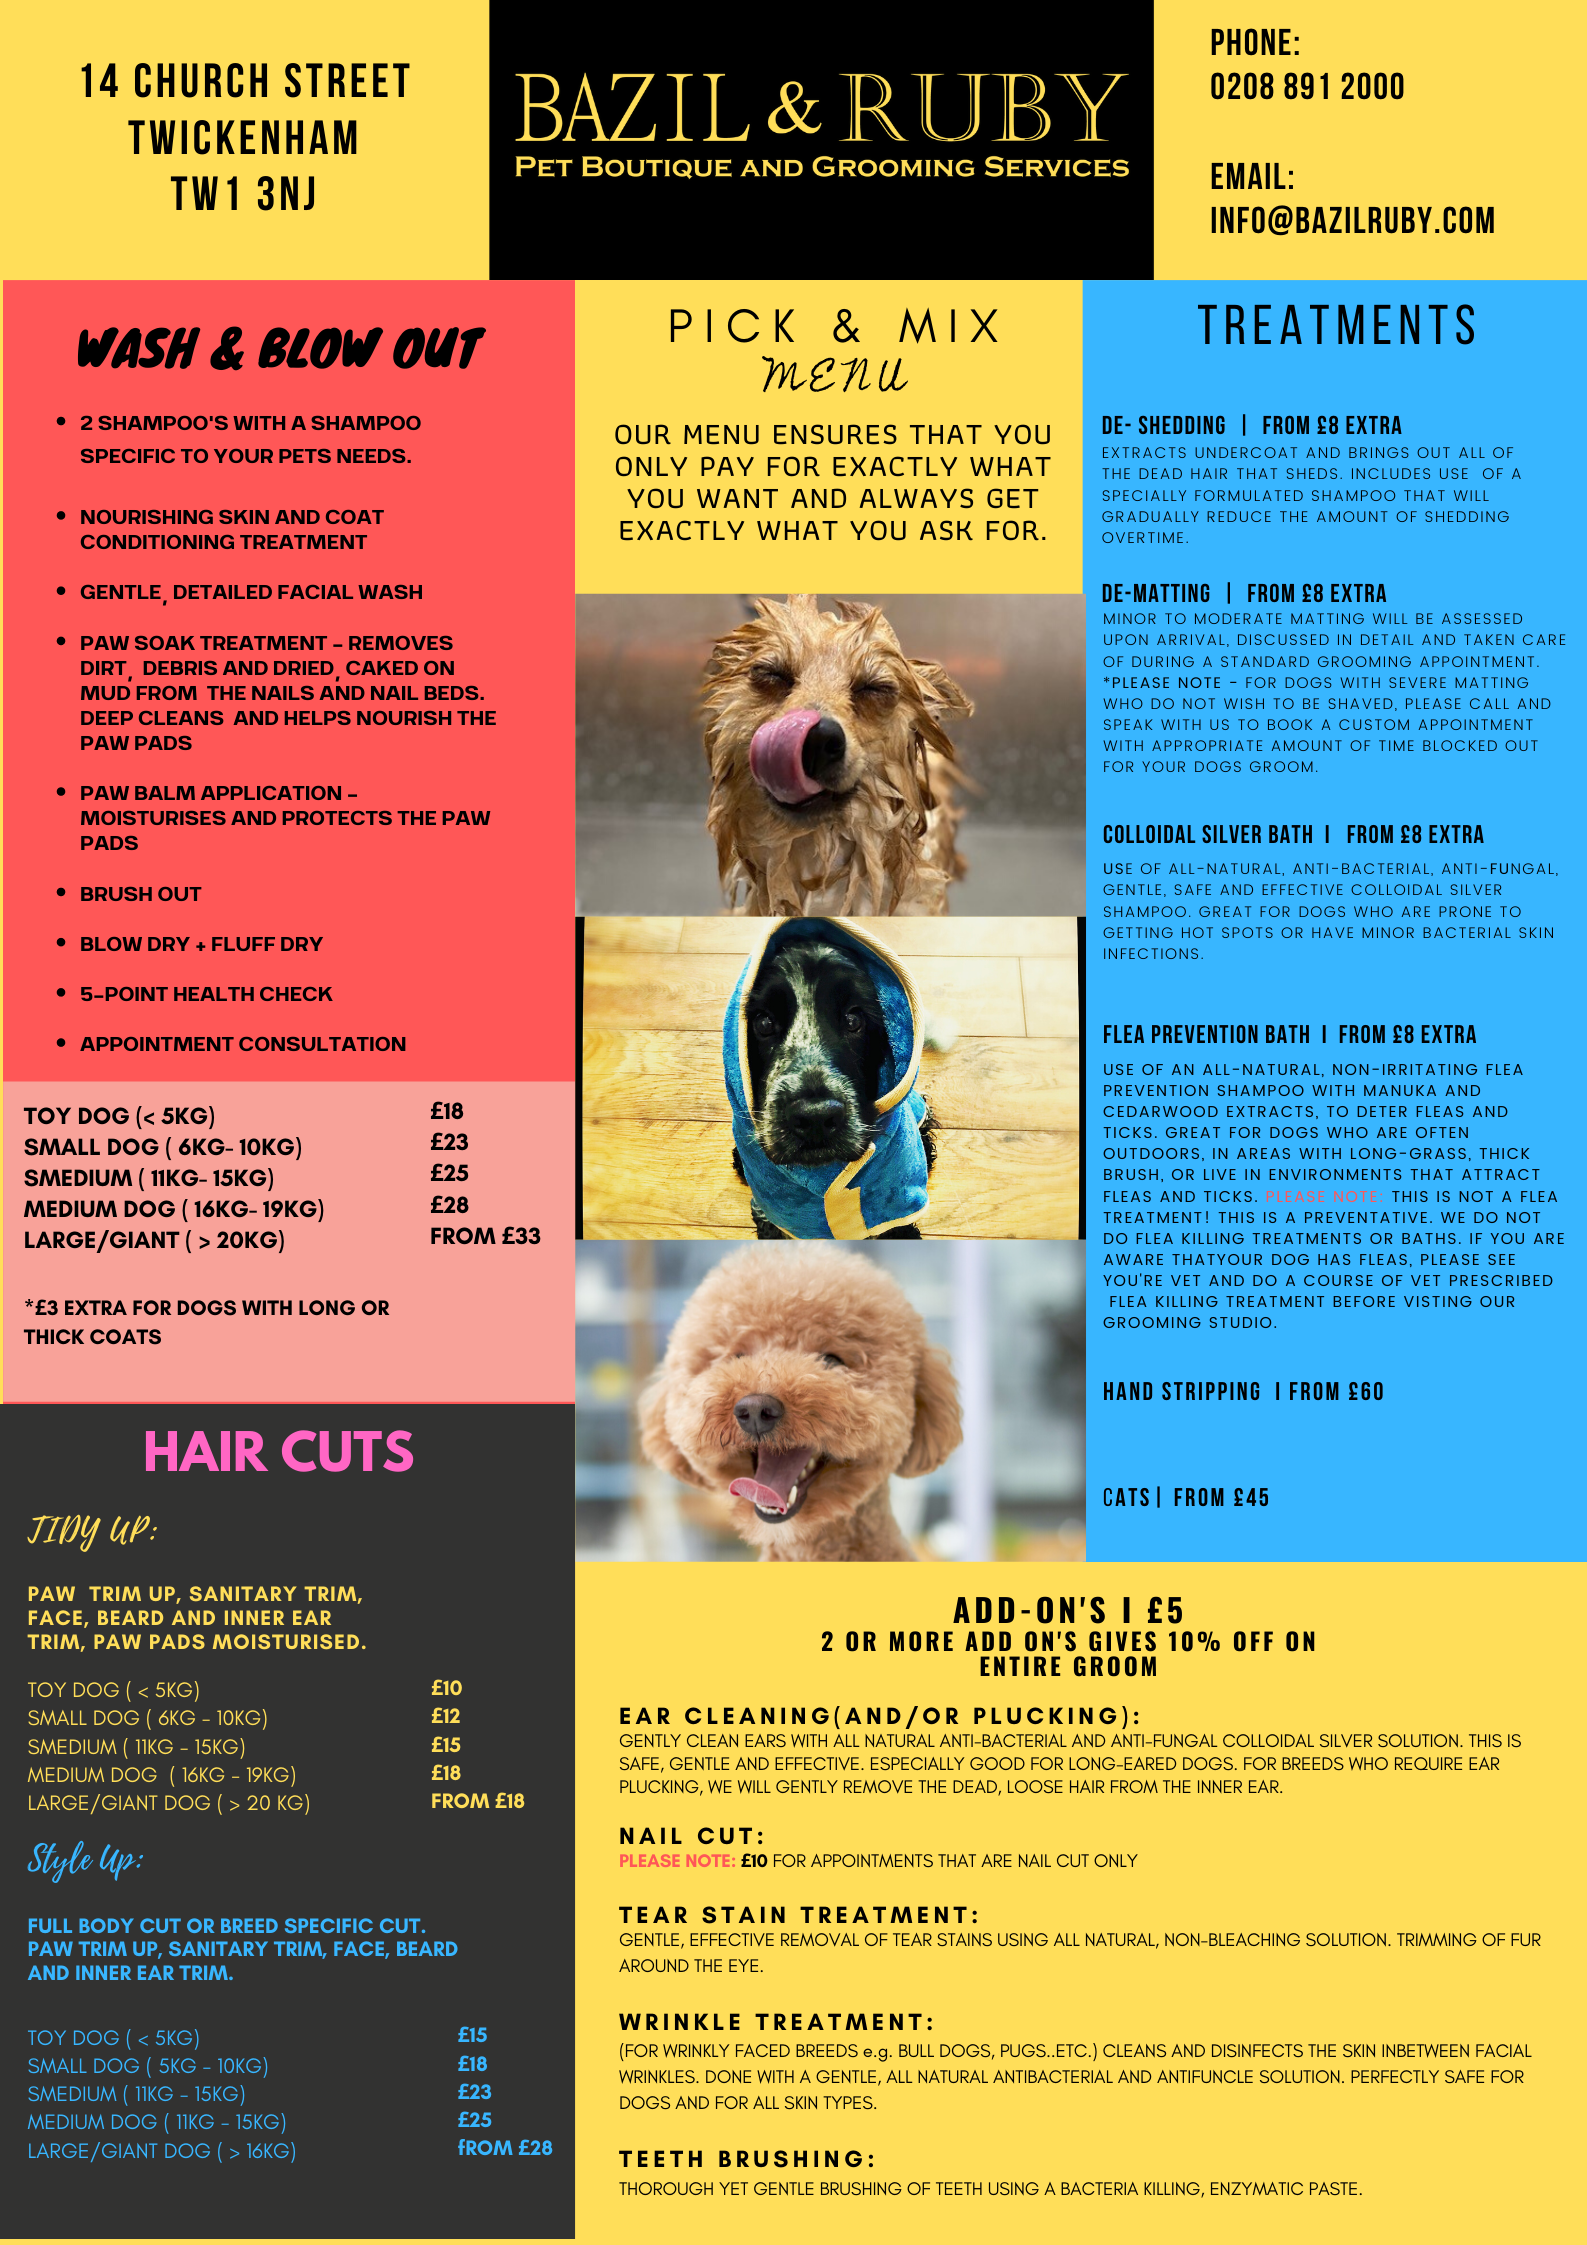 Pet - Grooming / Salon - The puppy Empire